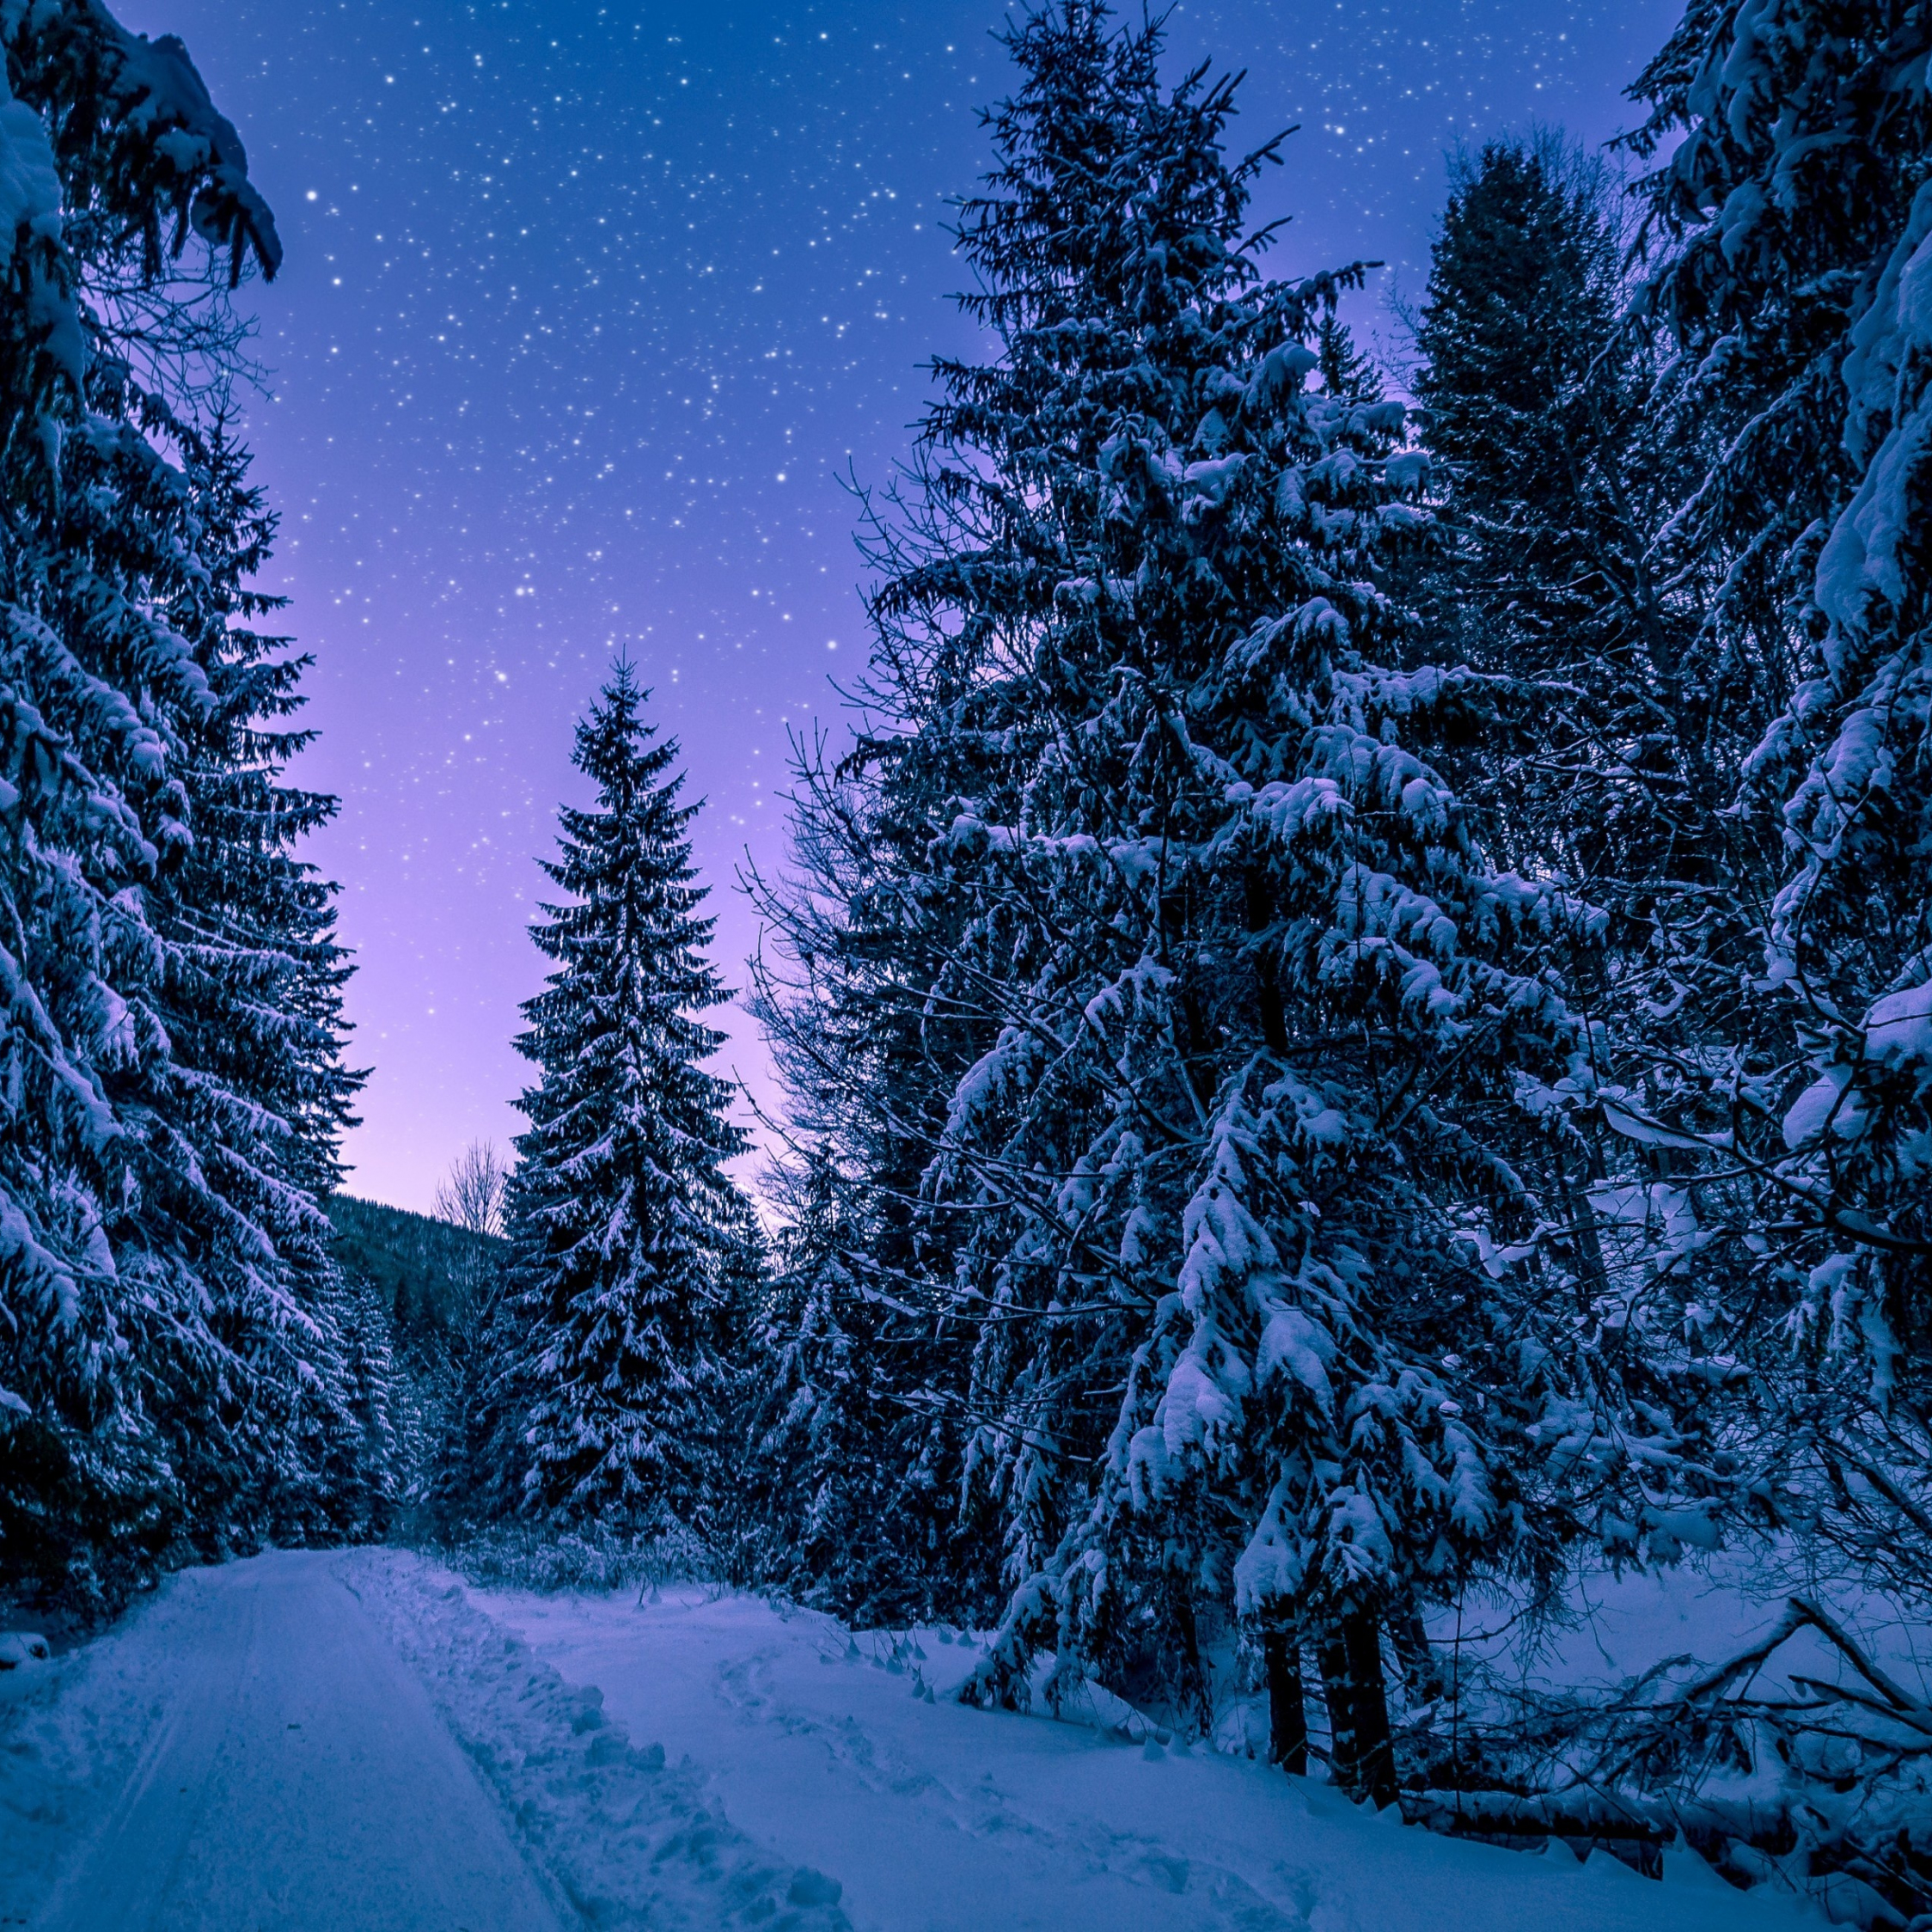 Download forest, trees, night, winter 2248x2248 wallpaper, ipad air, ipad air ipad ipad ipad mini ipad mini 2248x2248 HD image, background, 4117